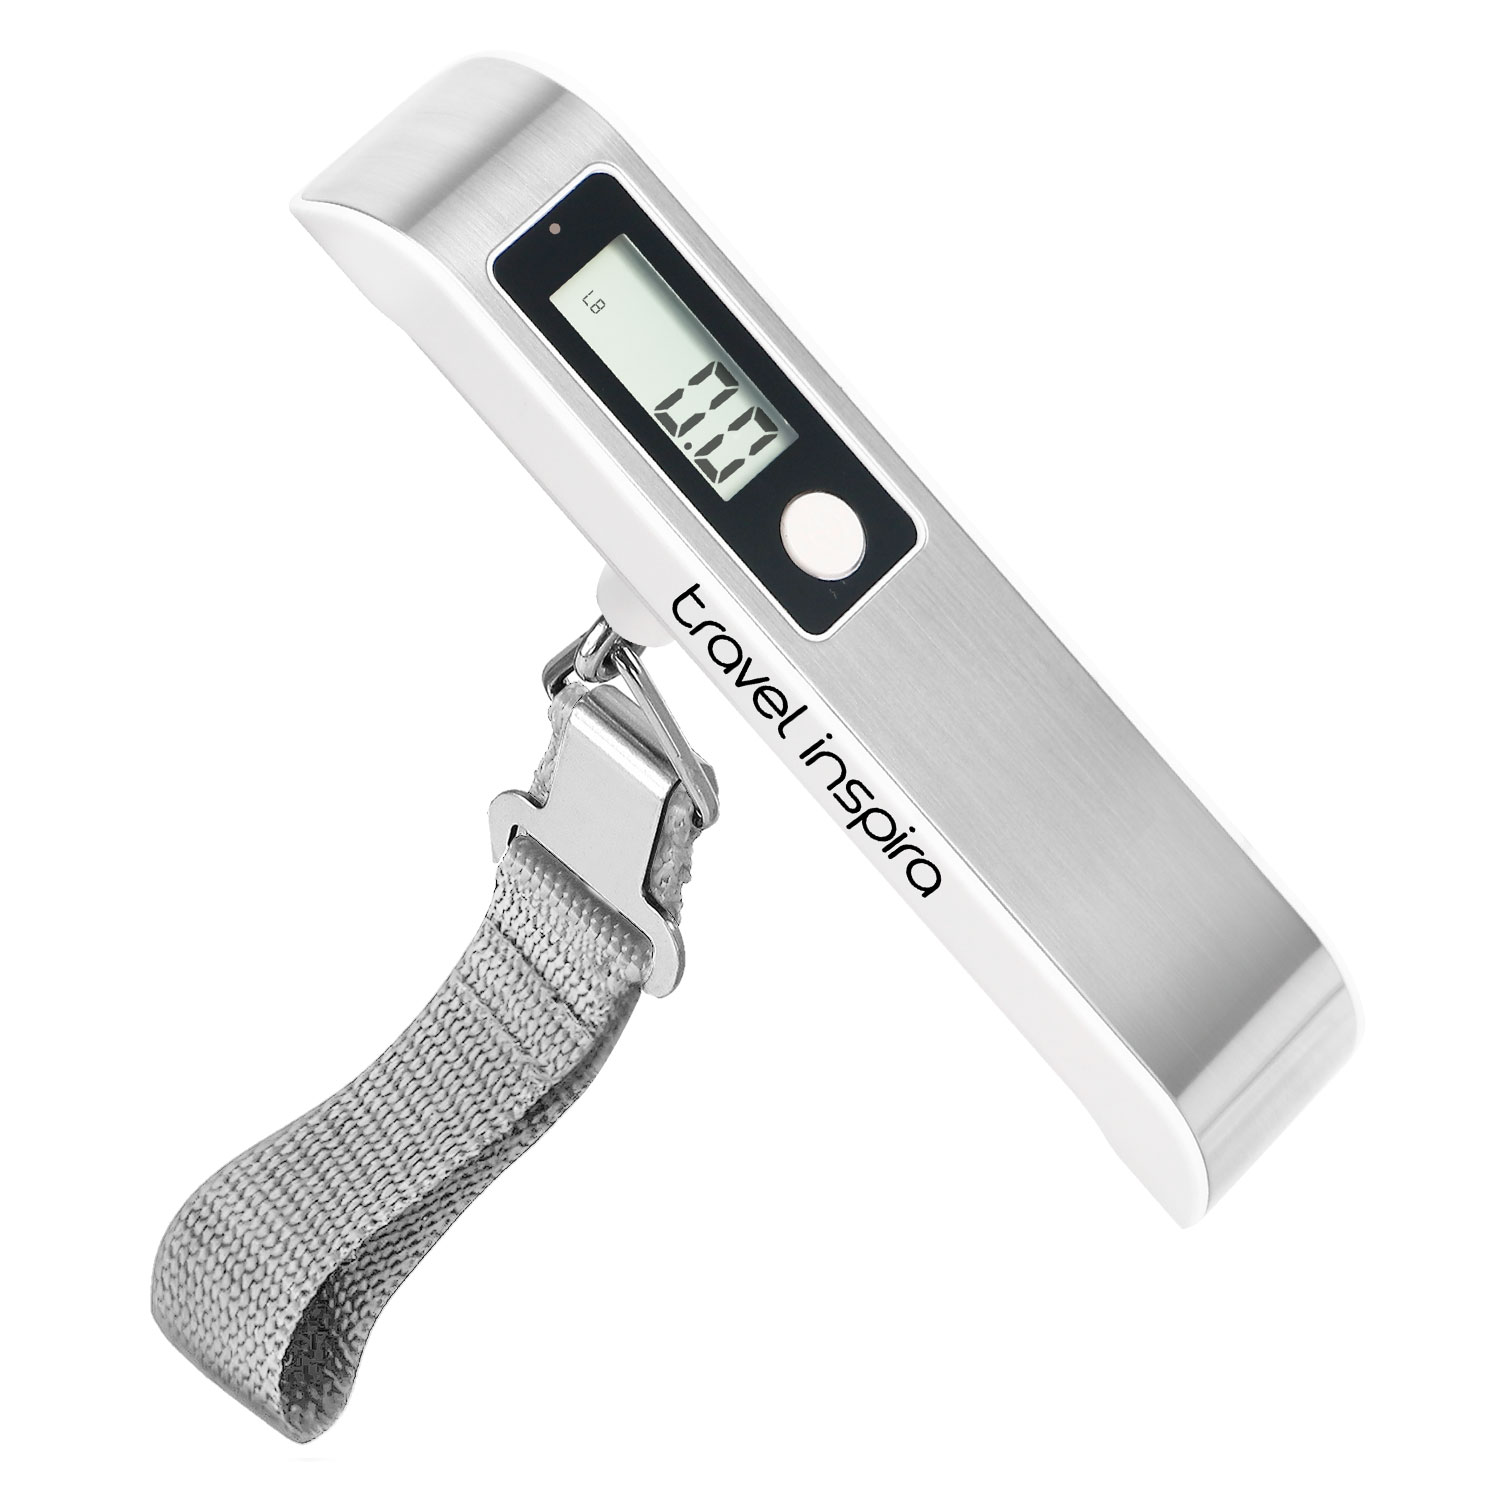 LS08 Portable Luggage Scale110LB /50 KG Series - Silver